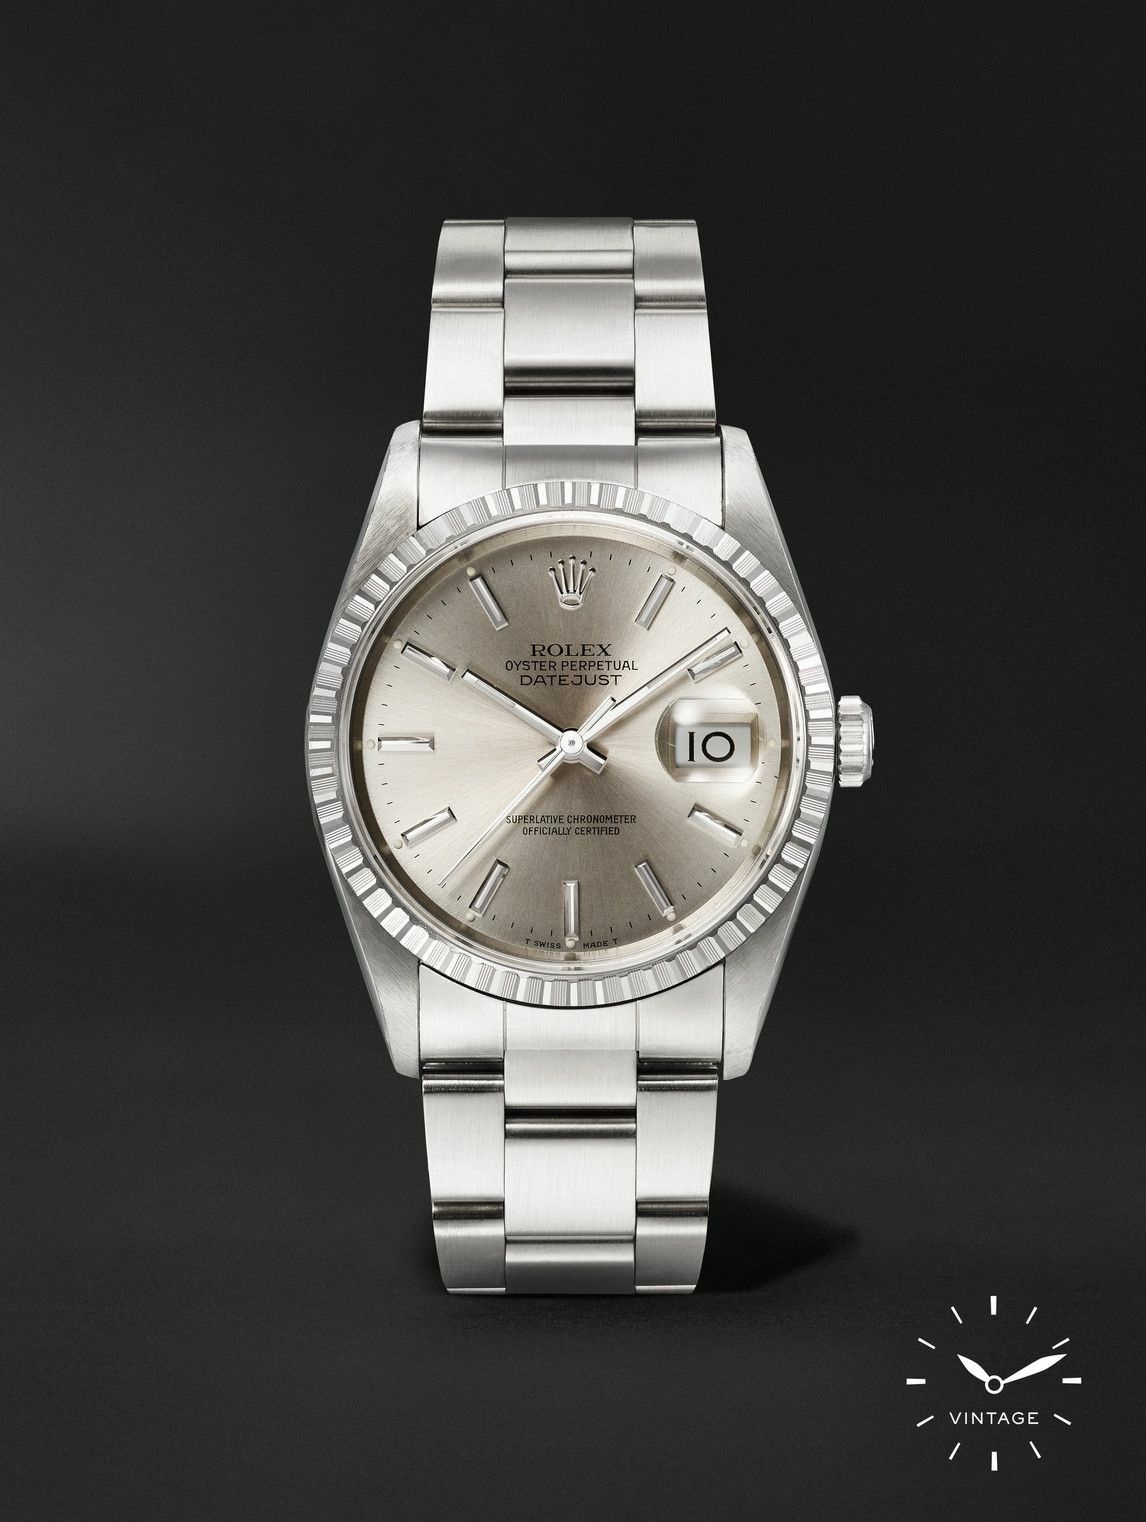 Photo: ROLEX - Vintage 1991 Datejust Automatic 36mm Stainless Steel Watch, Ref. No. 16220